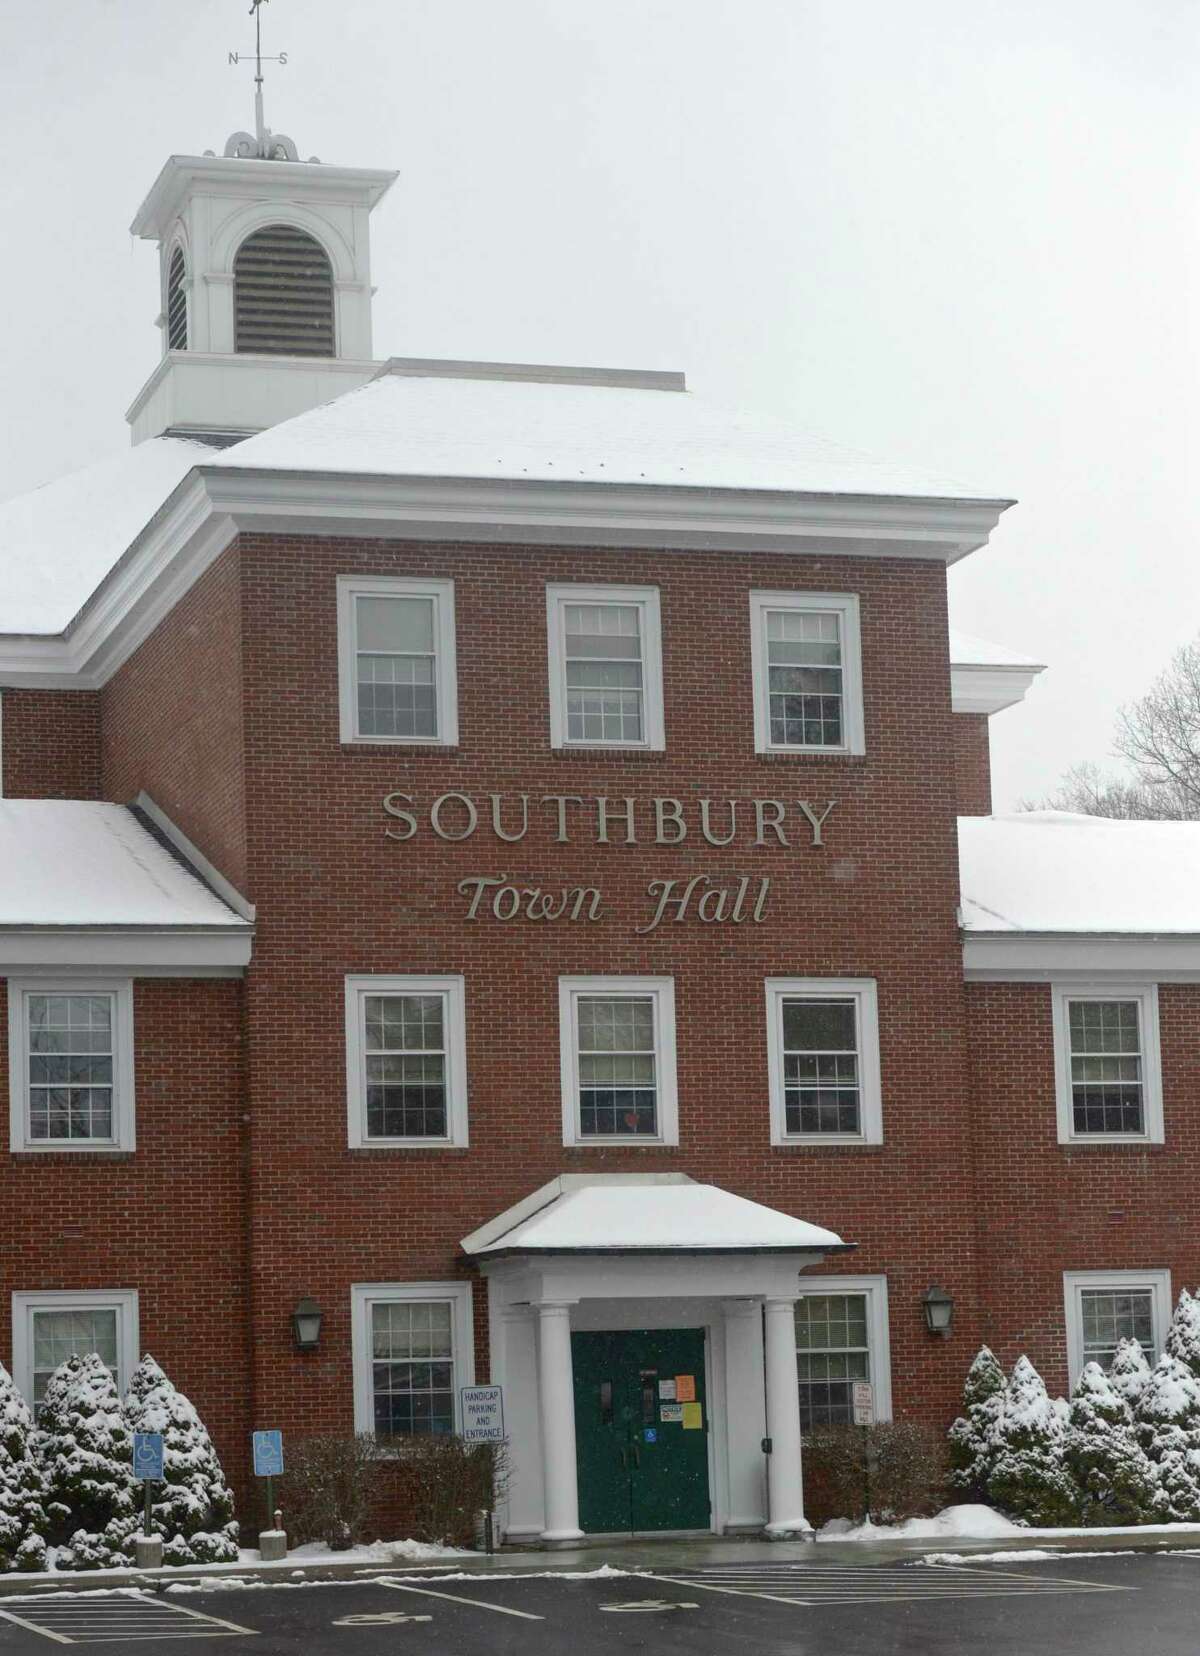 Southbury Town Hall on Friday, February 19, 2021, in Southbury, Conn.